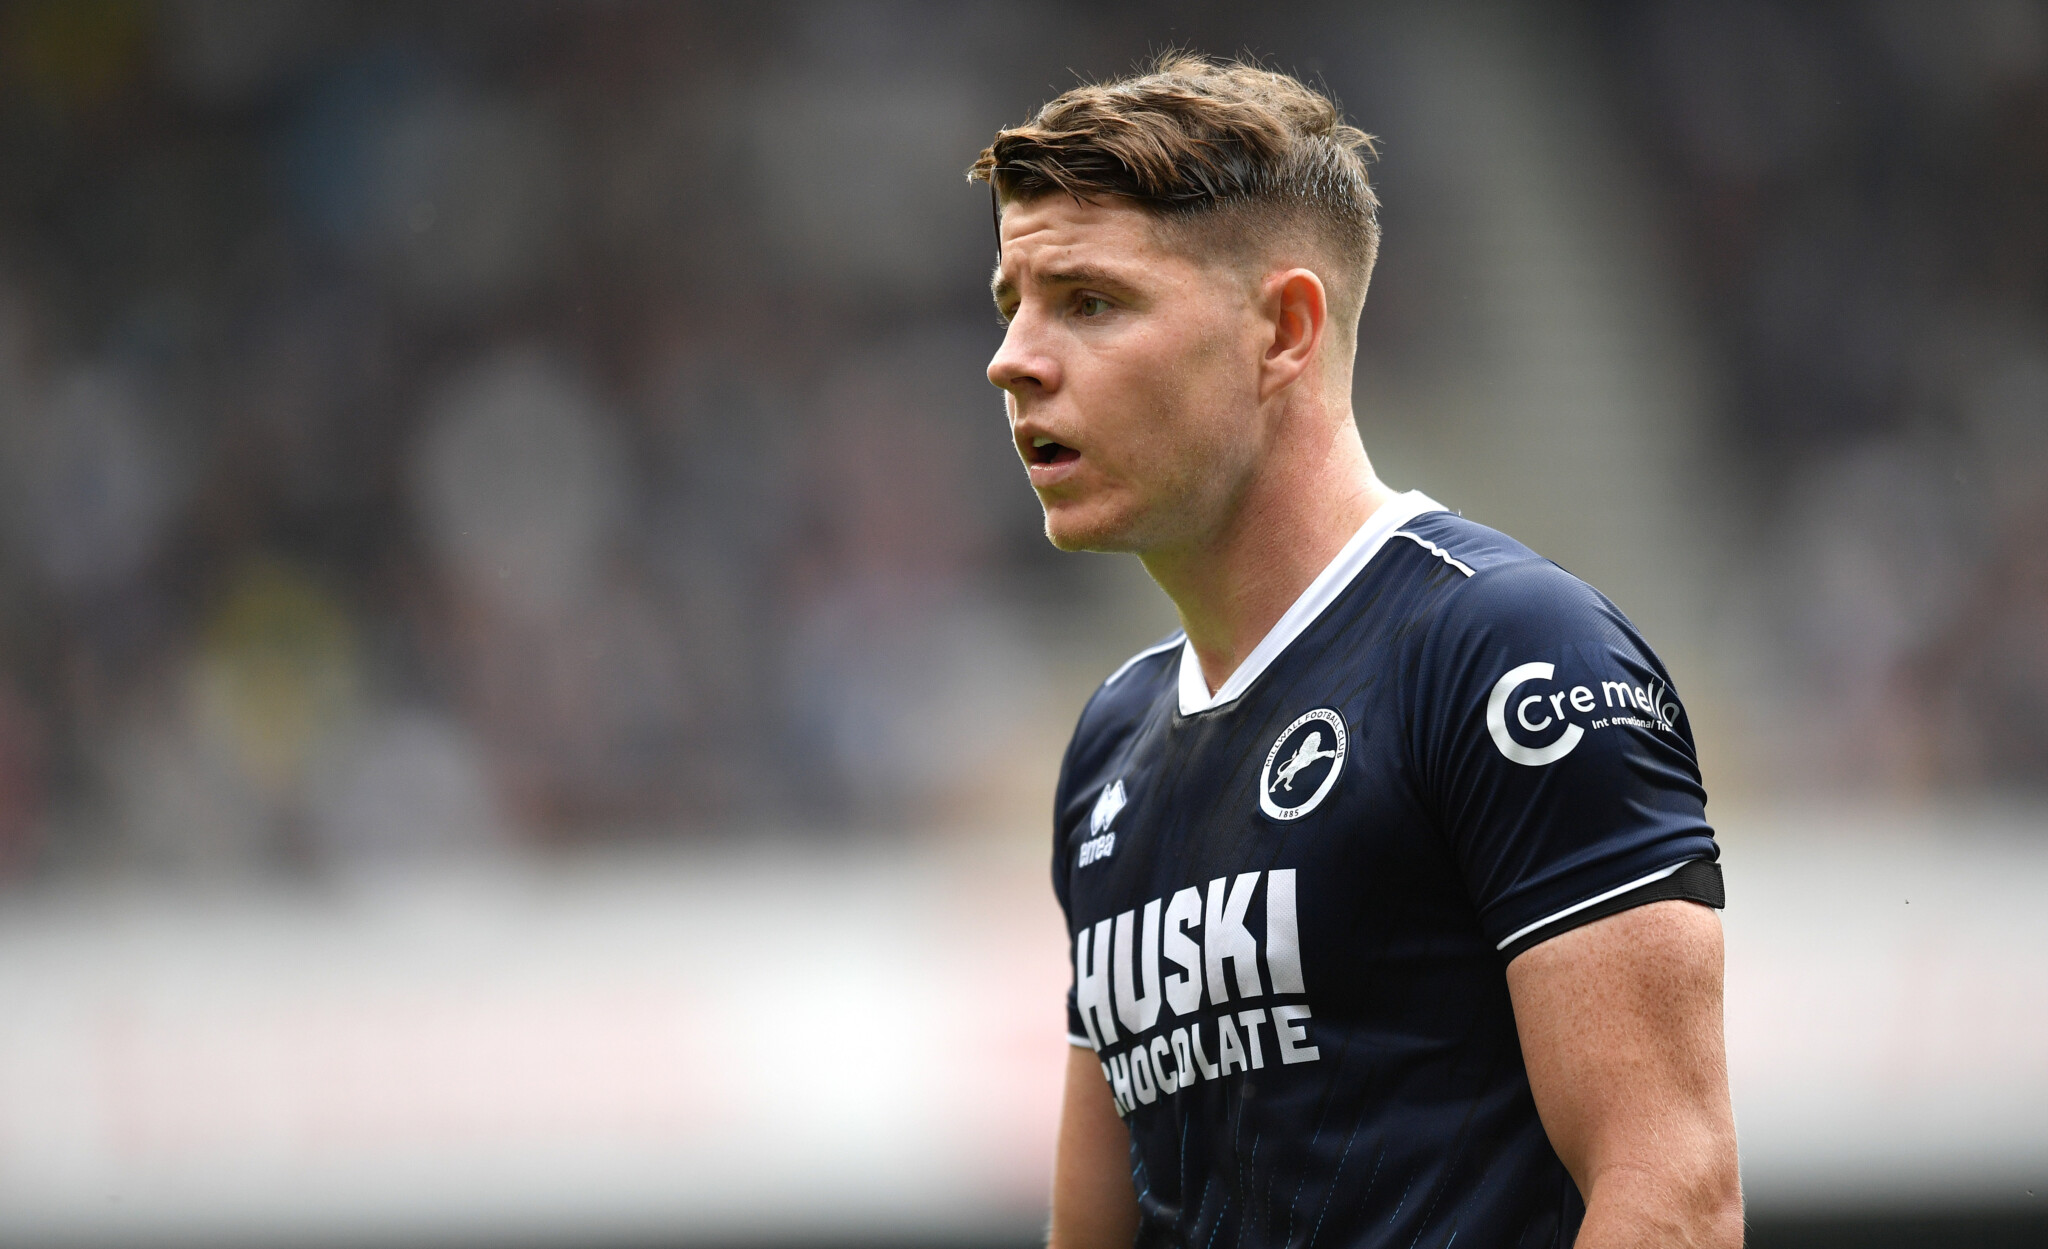 Millwall v Swansea team line-ups: Kevin Nisbet selection boost as Wallace  is fit too – South London News